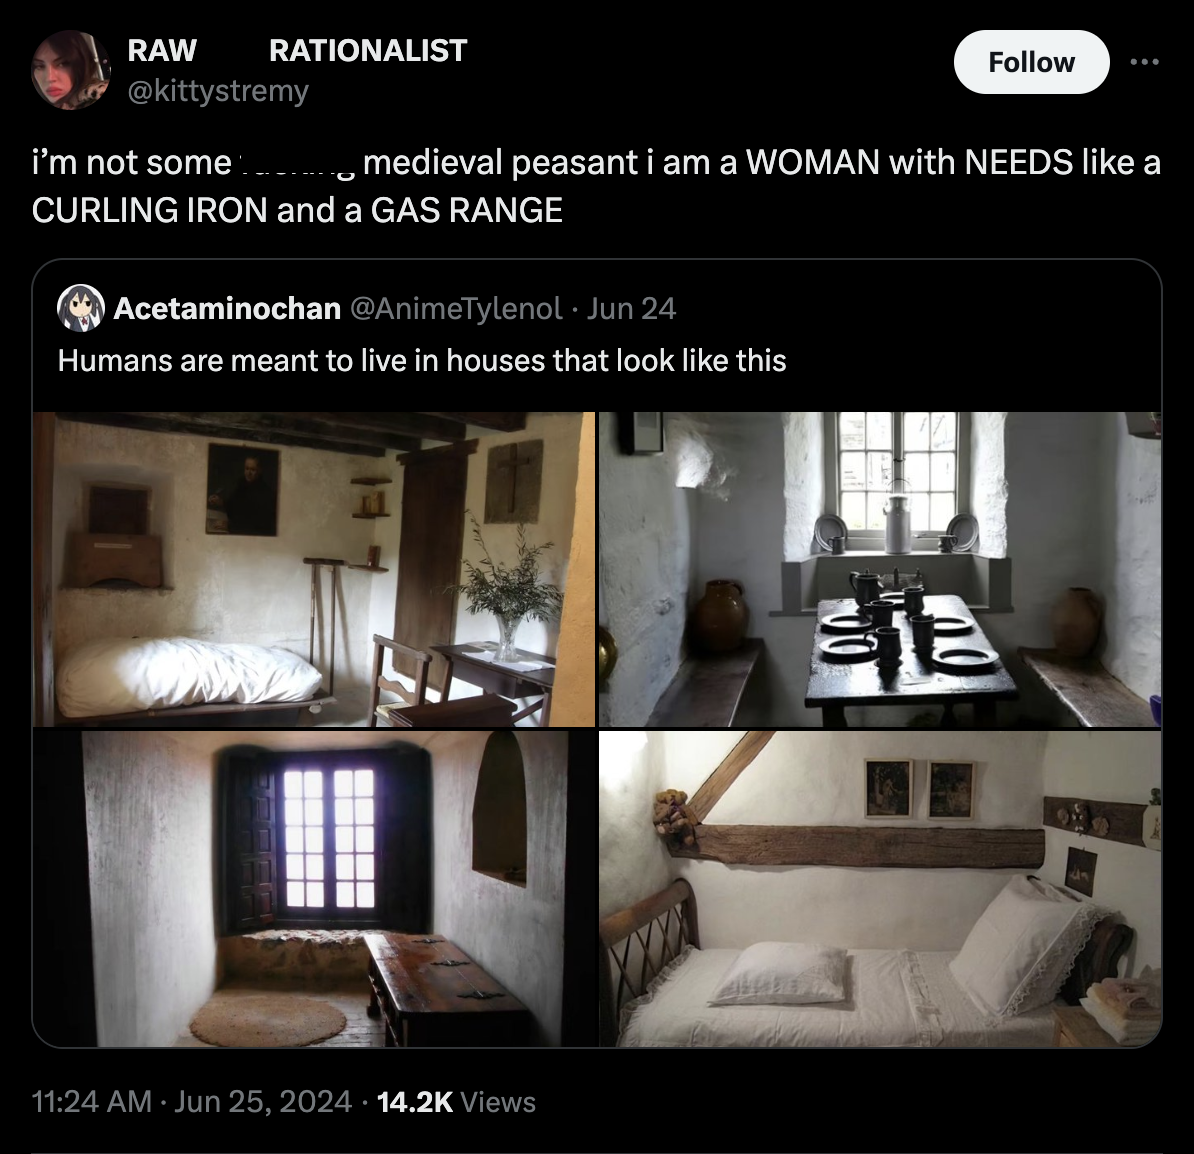 interior design - Rationalist Raw i'm not some medieval peasant i am a Woman with Needs a Curling Iron and a Gas Range Acetaminochan Jun 24 Humans are meant to live in houses that look this T Views